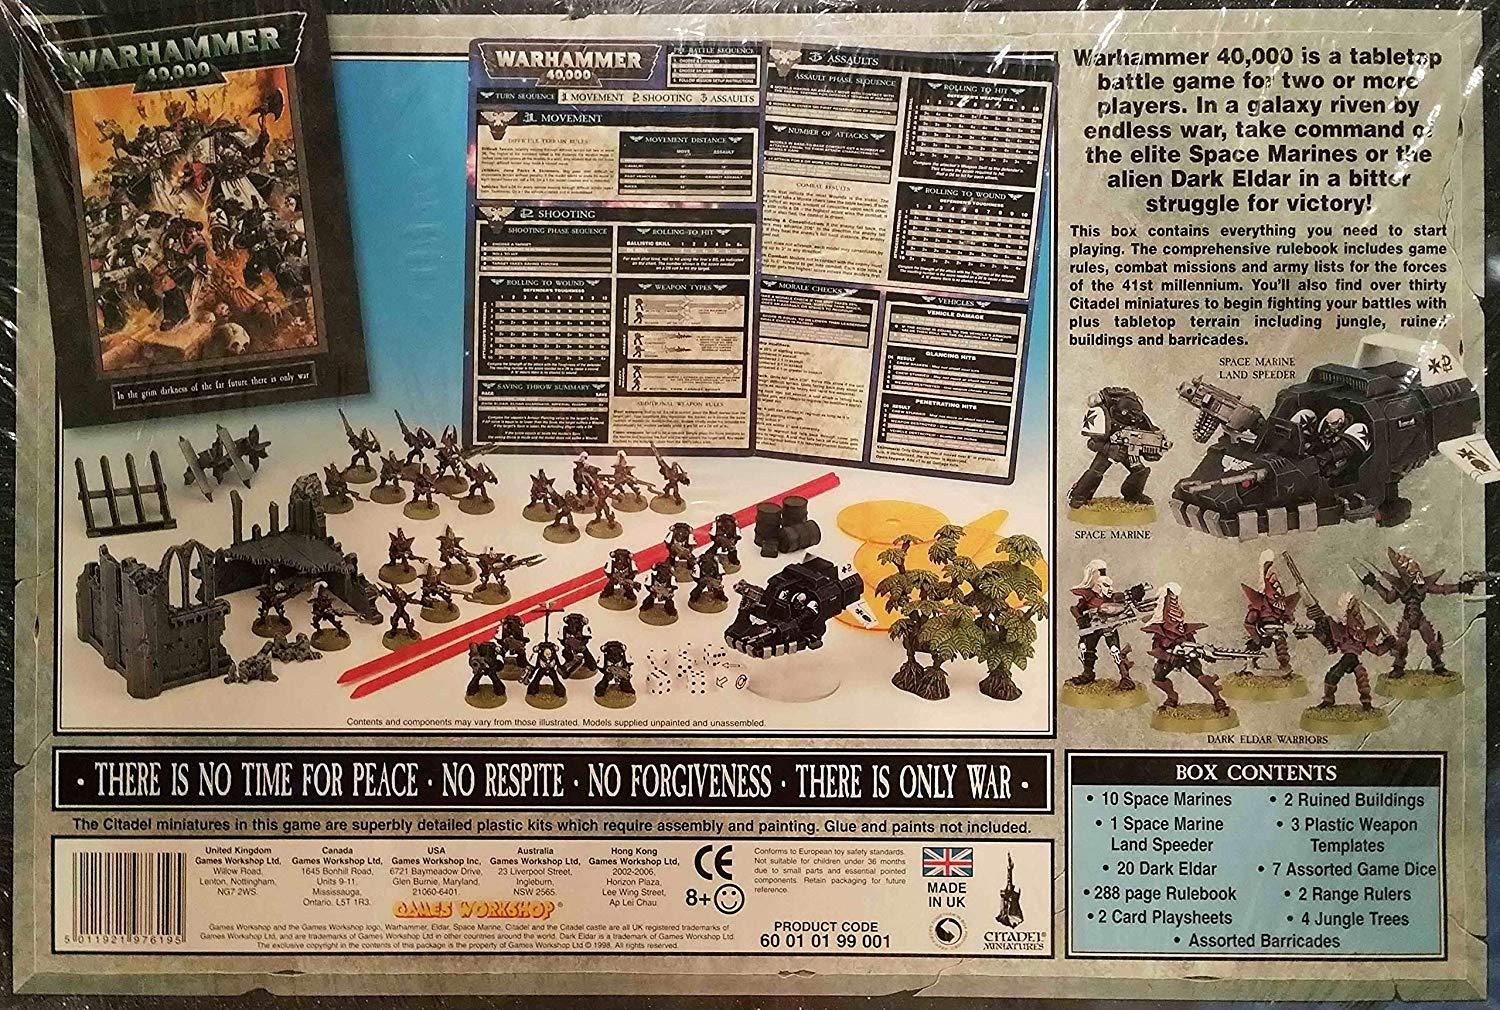 3rd Edition, Retro Review, Warhammer 40,000